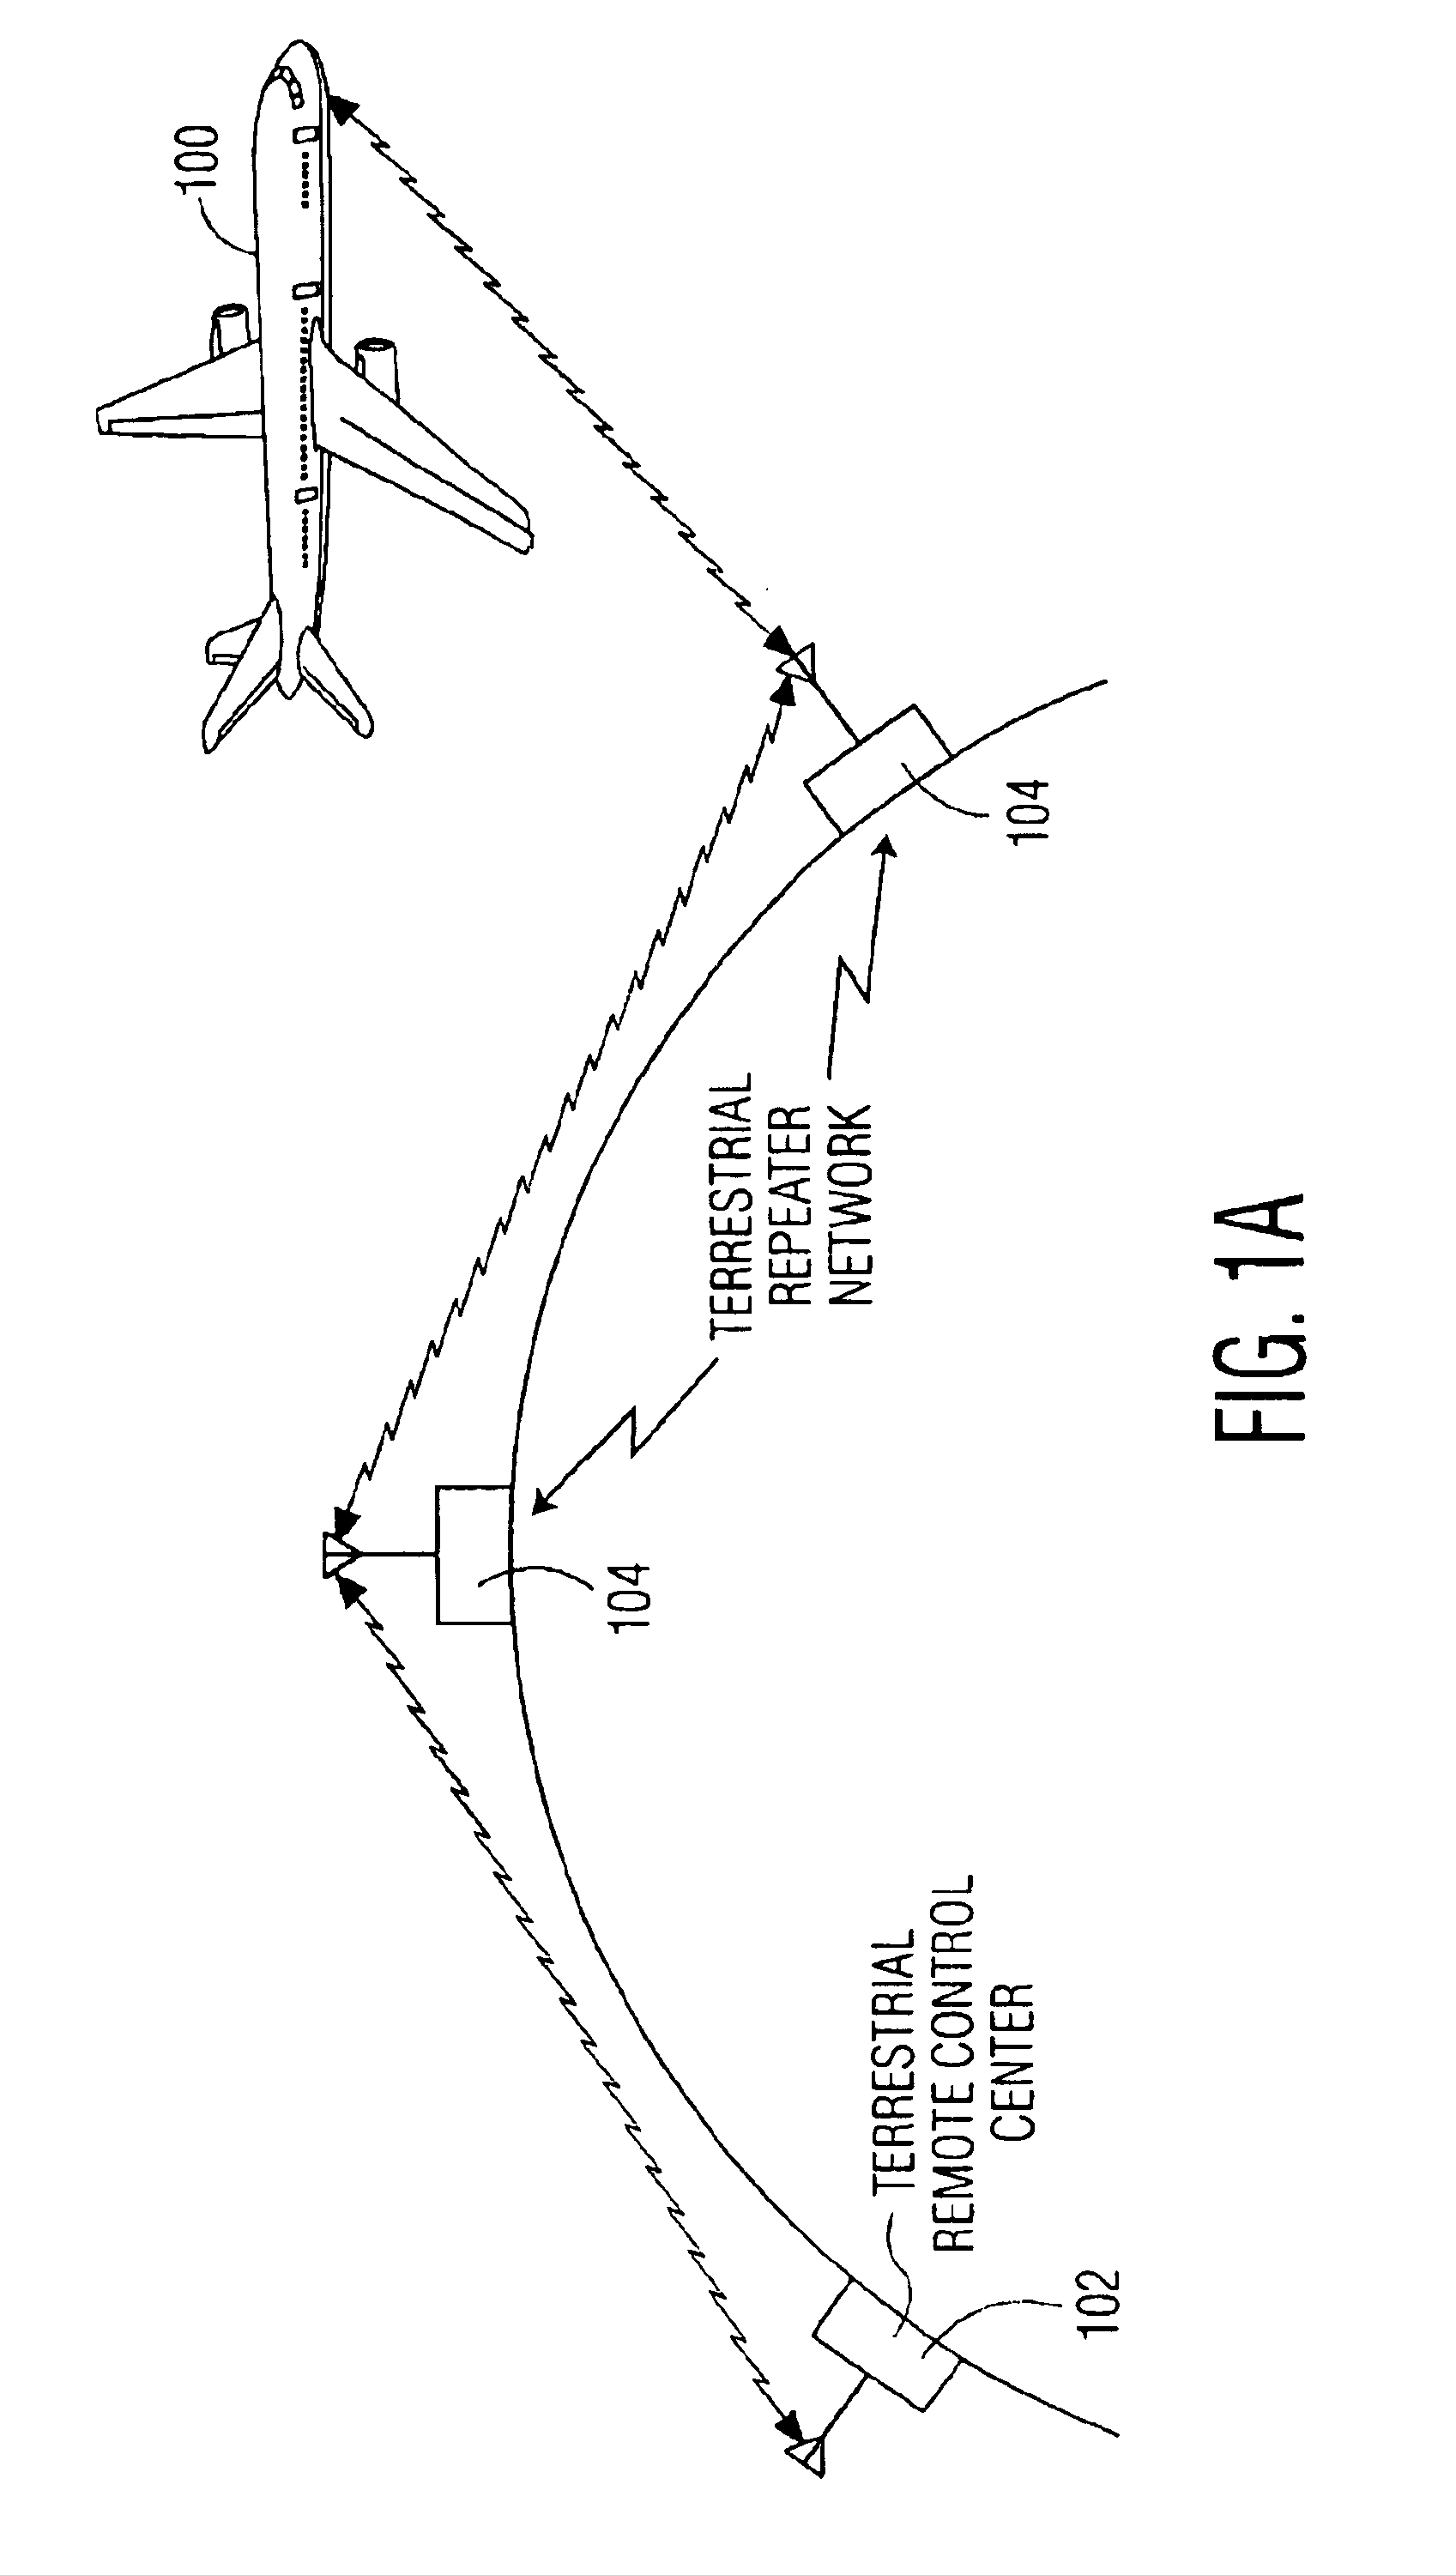 System for assuming and maintaining secure remote control of an aircraft